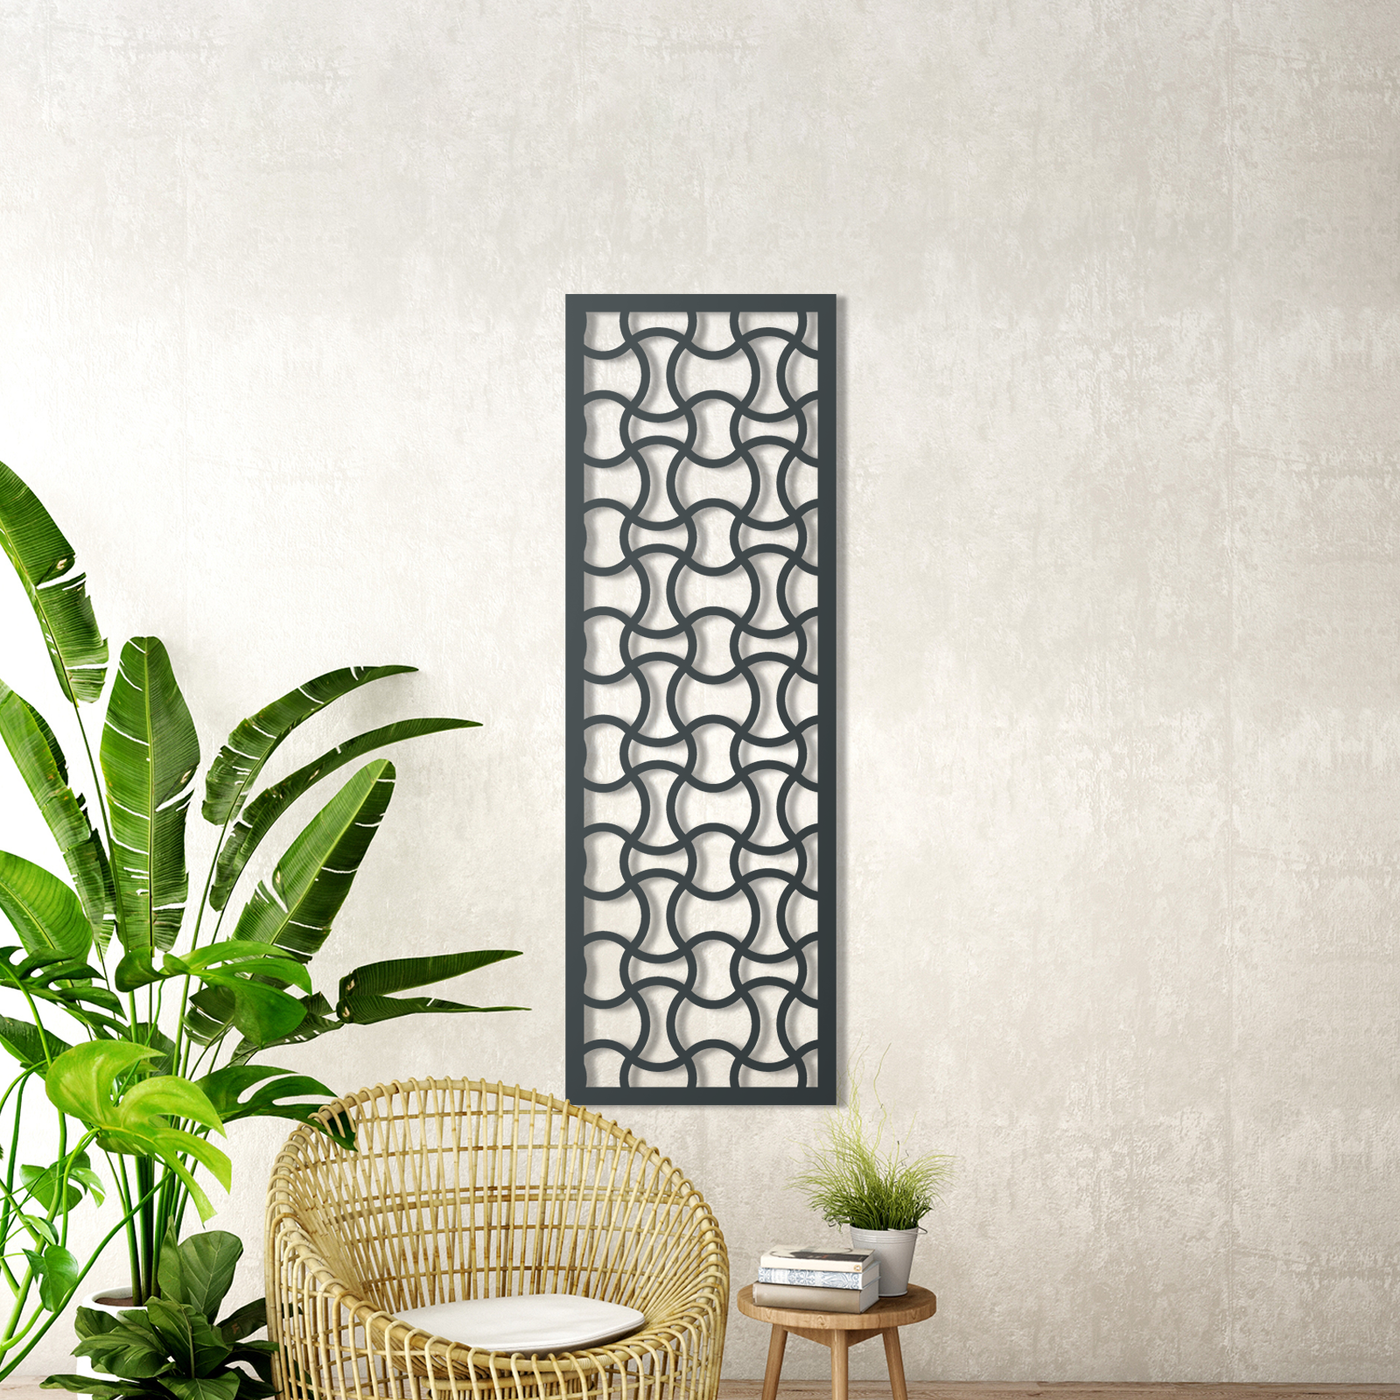 Cross Stitch Metal Screen: A Durable Solution for Garden Privacy